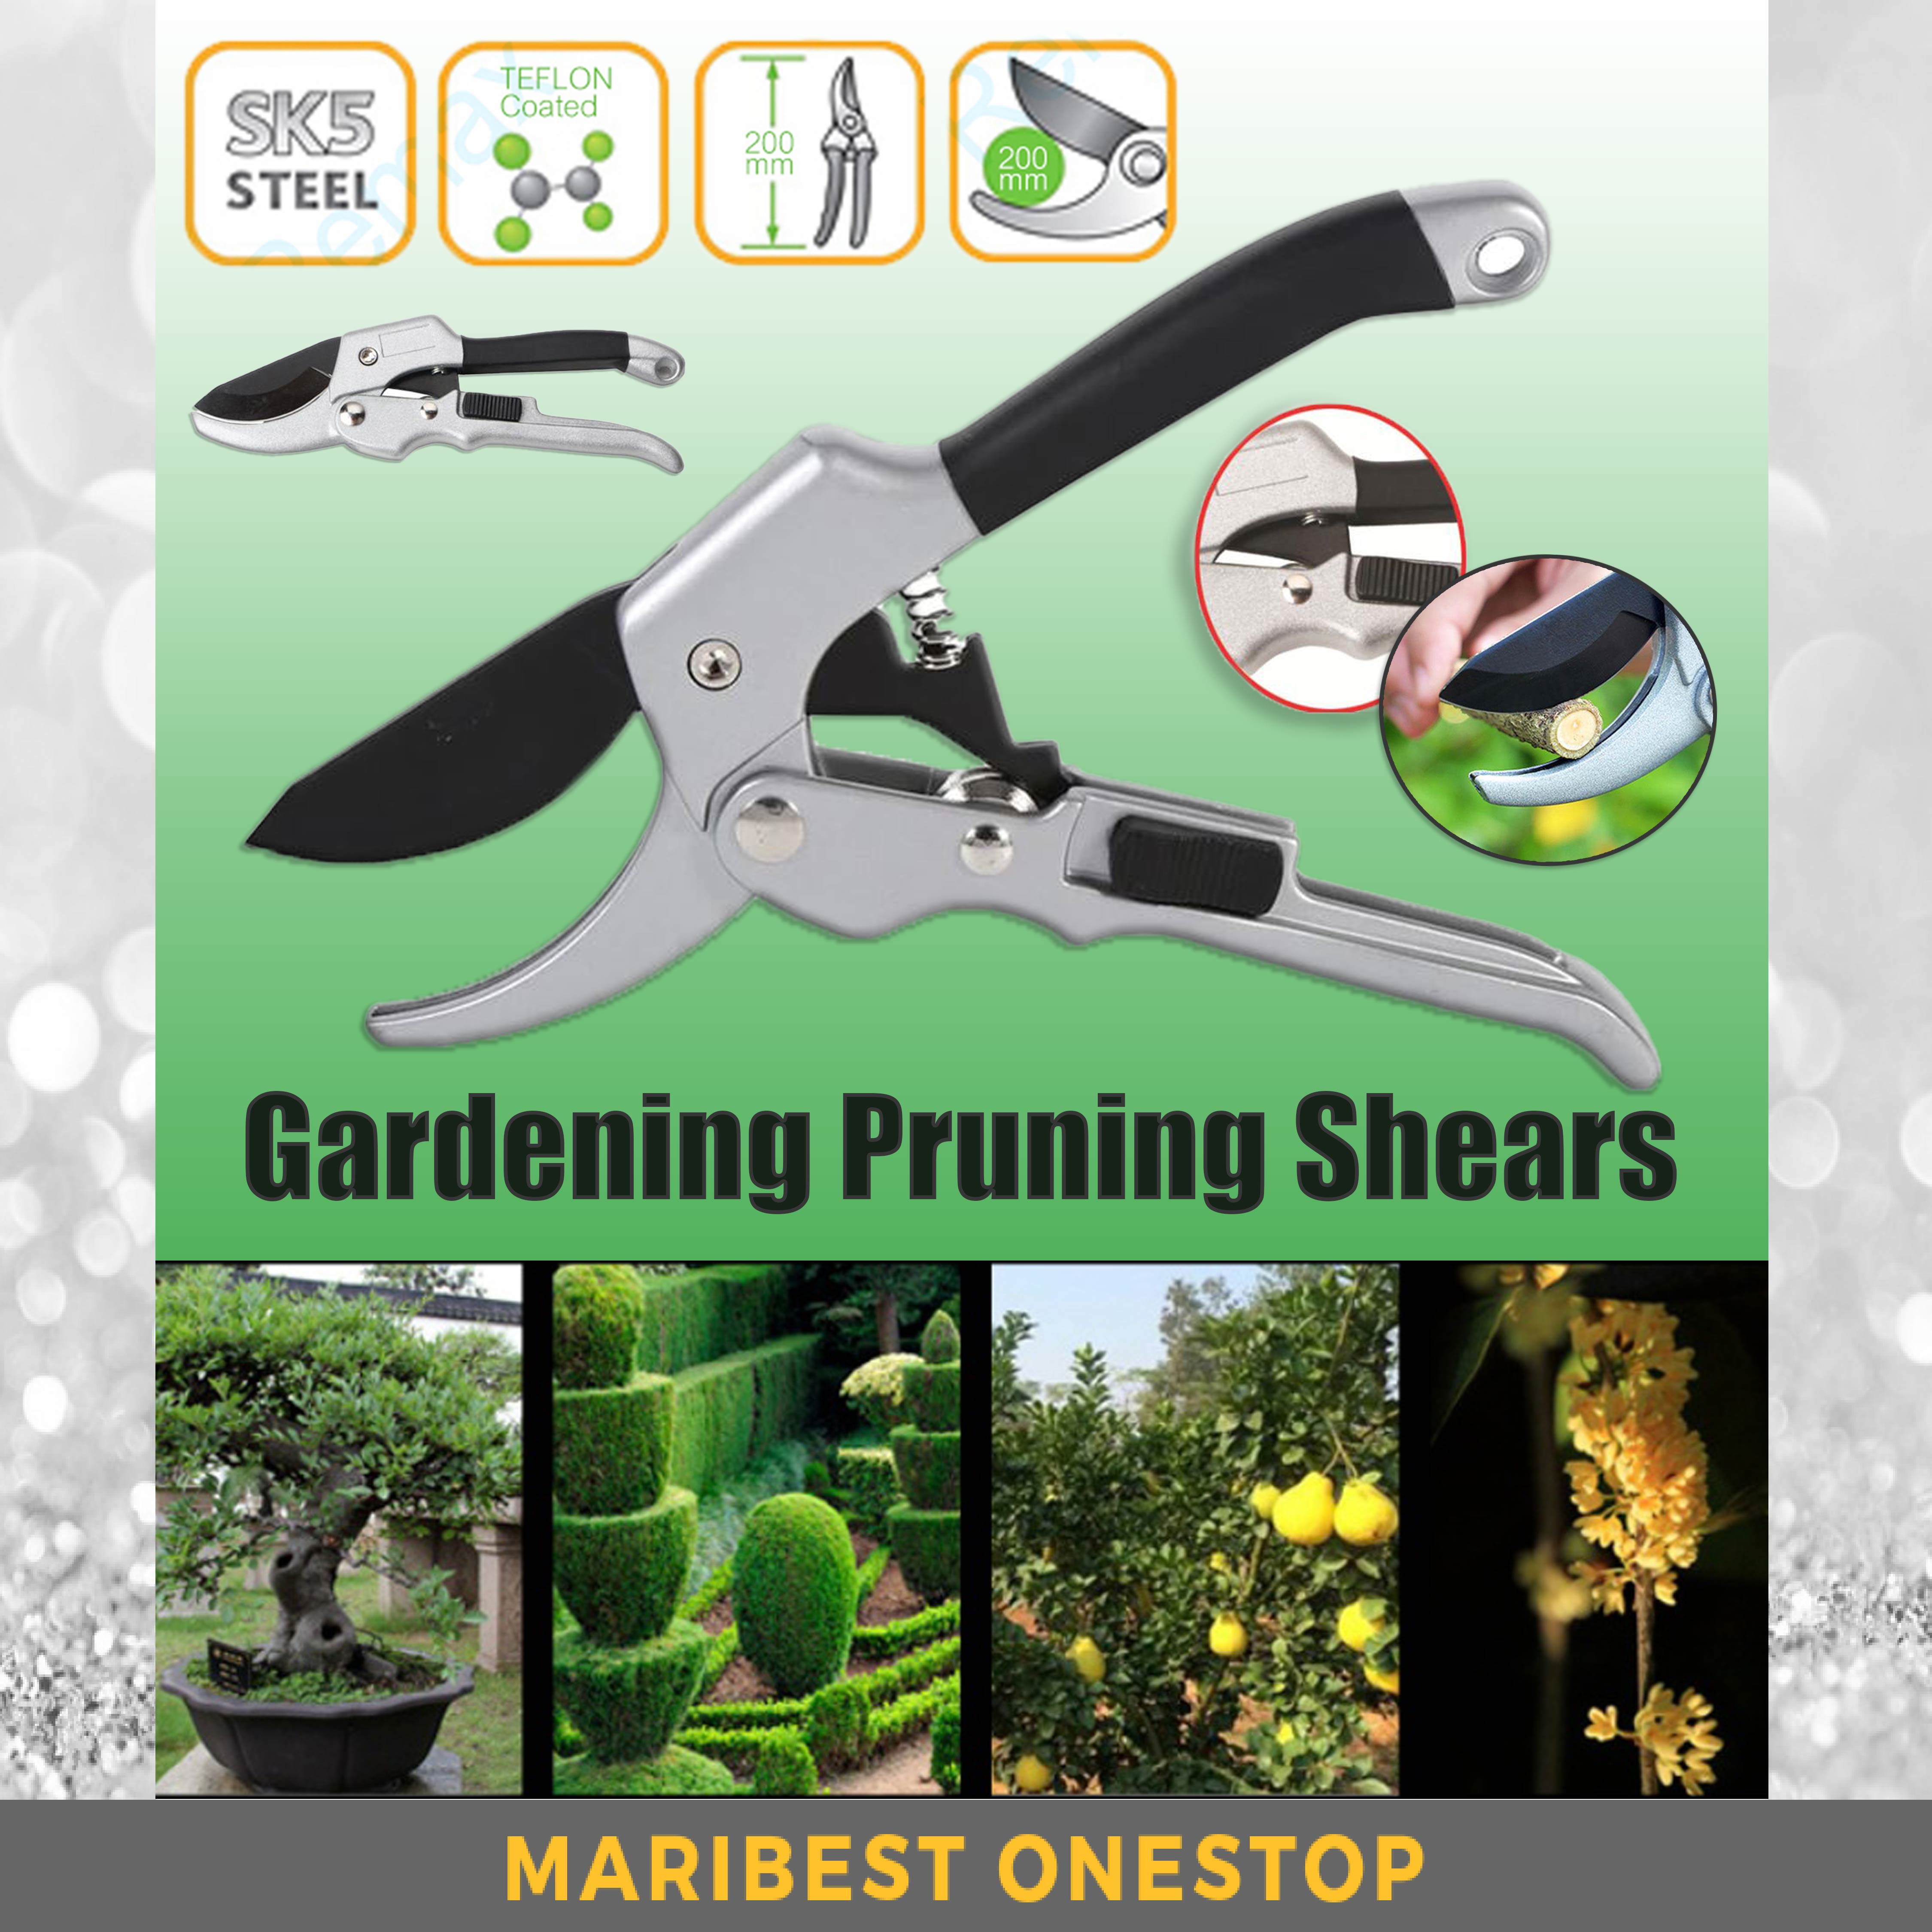 Bonsai and Other Plants Rose Bush Flower POHAKU SK-5 Gardening Hand Tools Garden Shears 8.0 Inch Bypass Pruning Shears for Gardening with a Spare Spring and a Sheath for Trimming Herb Vegetables 